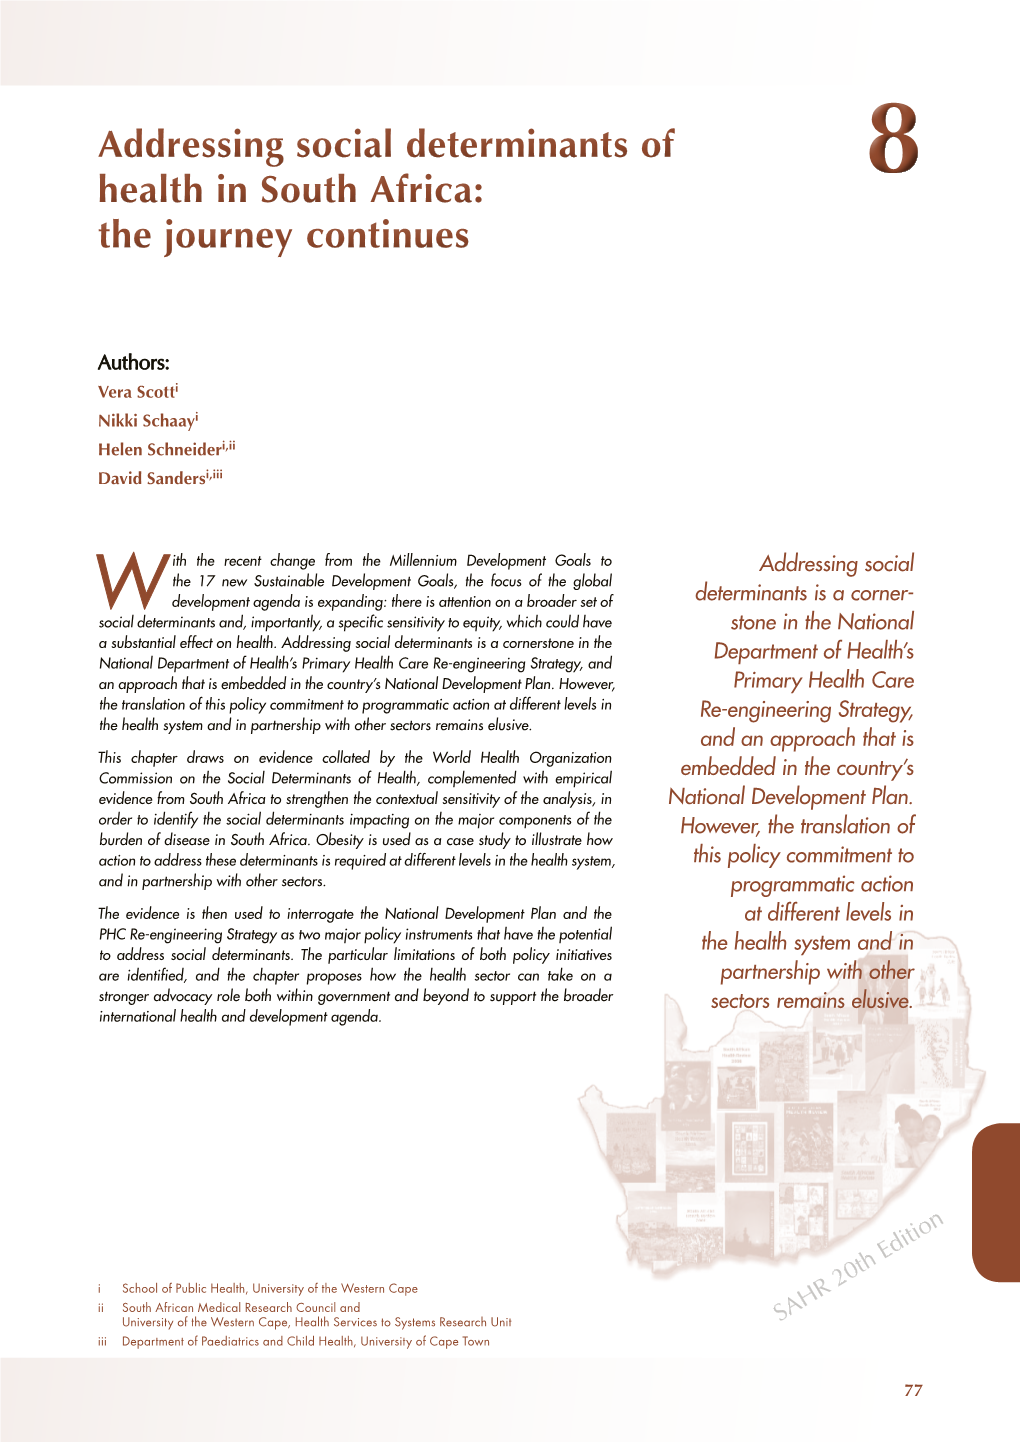 Addressing Social Determinants of Health in South Africa: 8 the Journey Continues